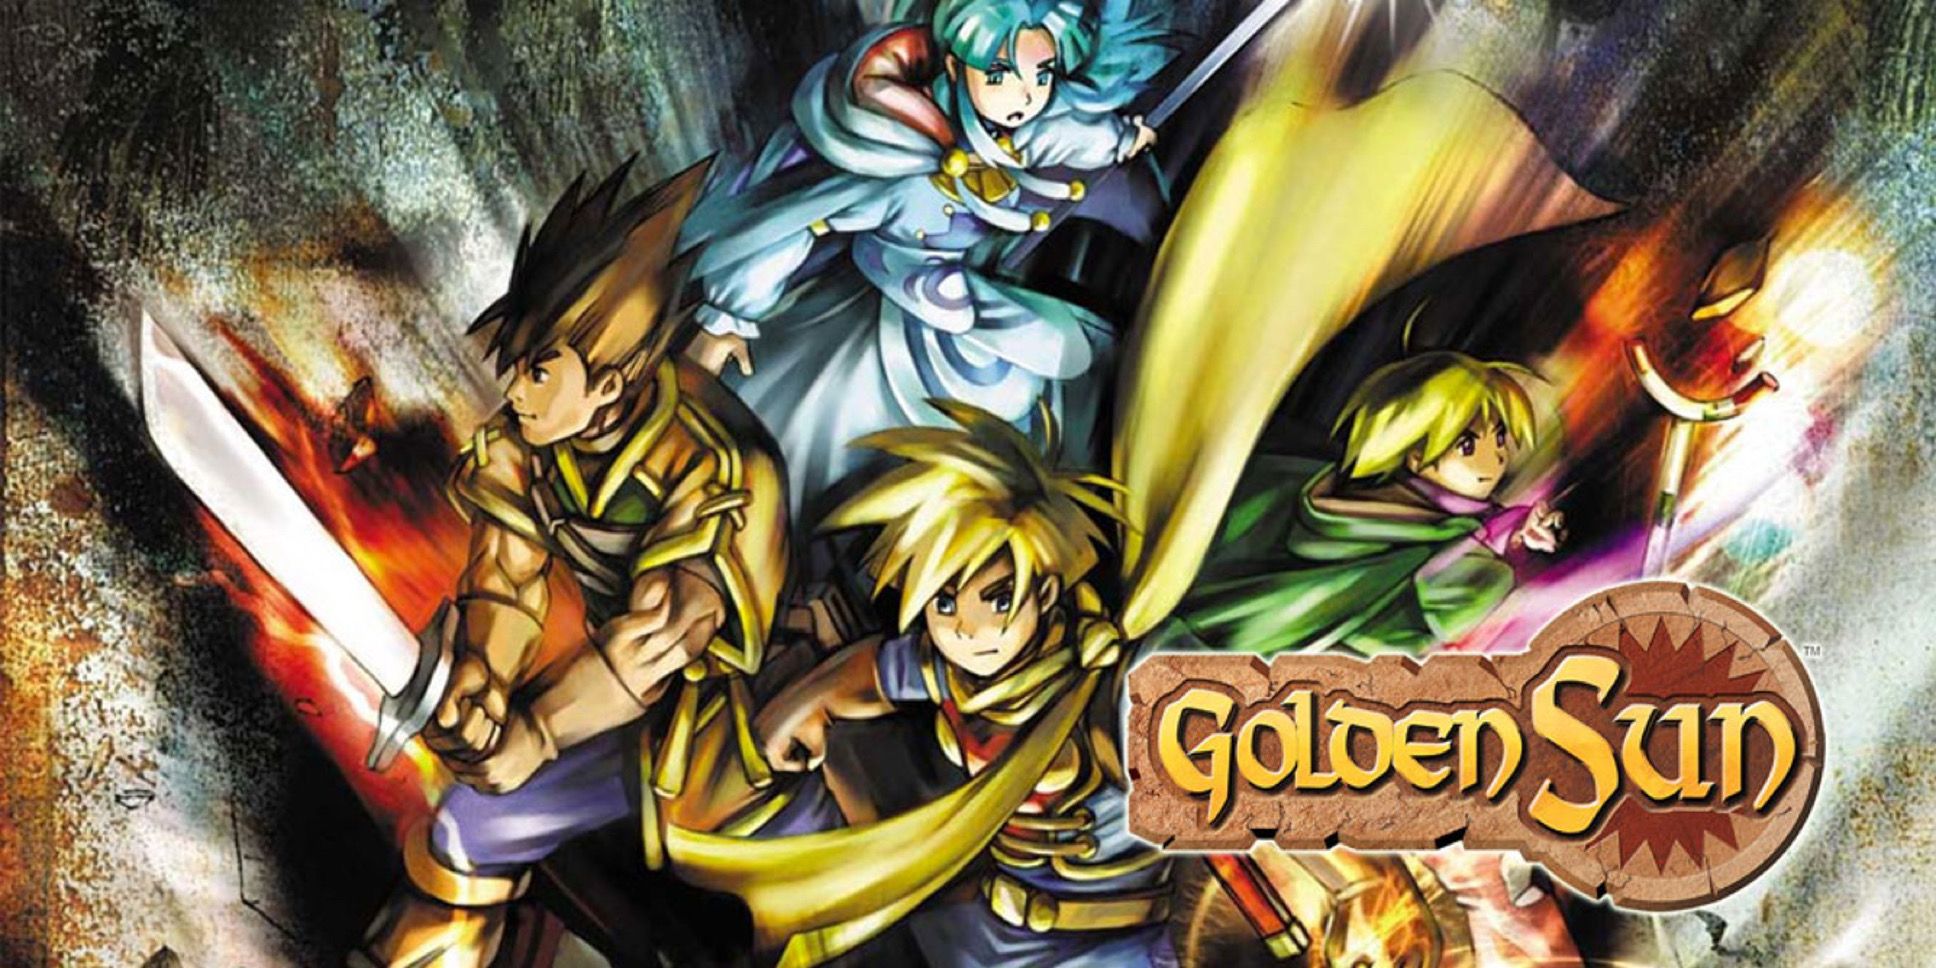 Game Boy Advance Nintendo Games With the Best Stories, Ranked